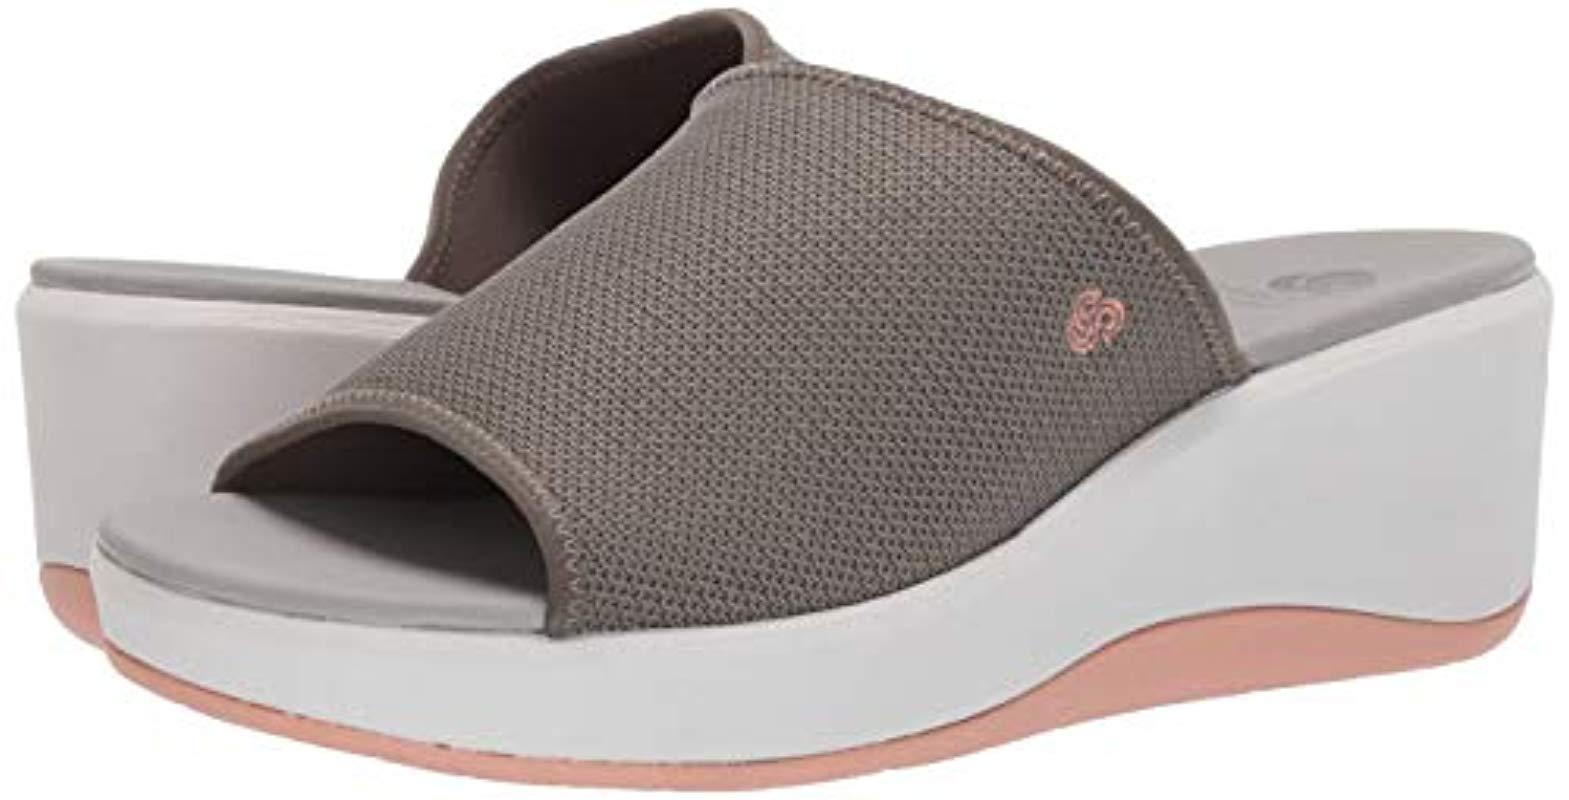 cloudsteppers by clarks step cali bay wedge sandal